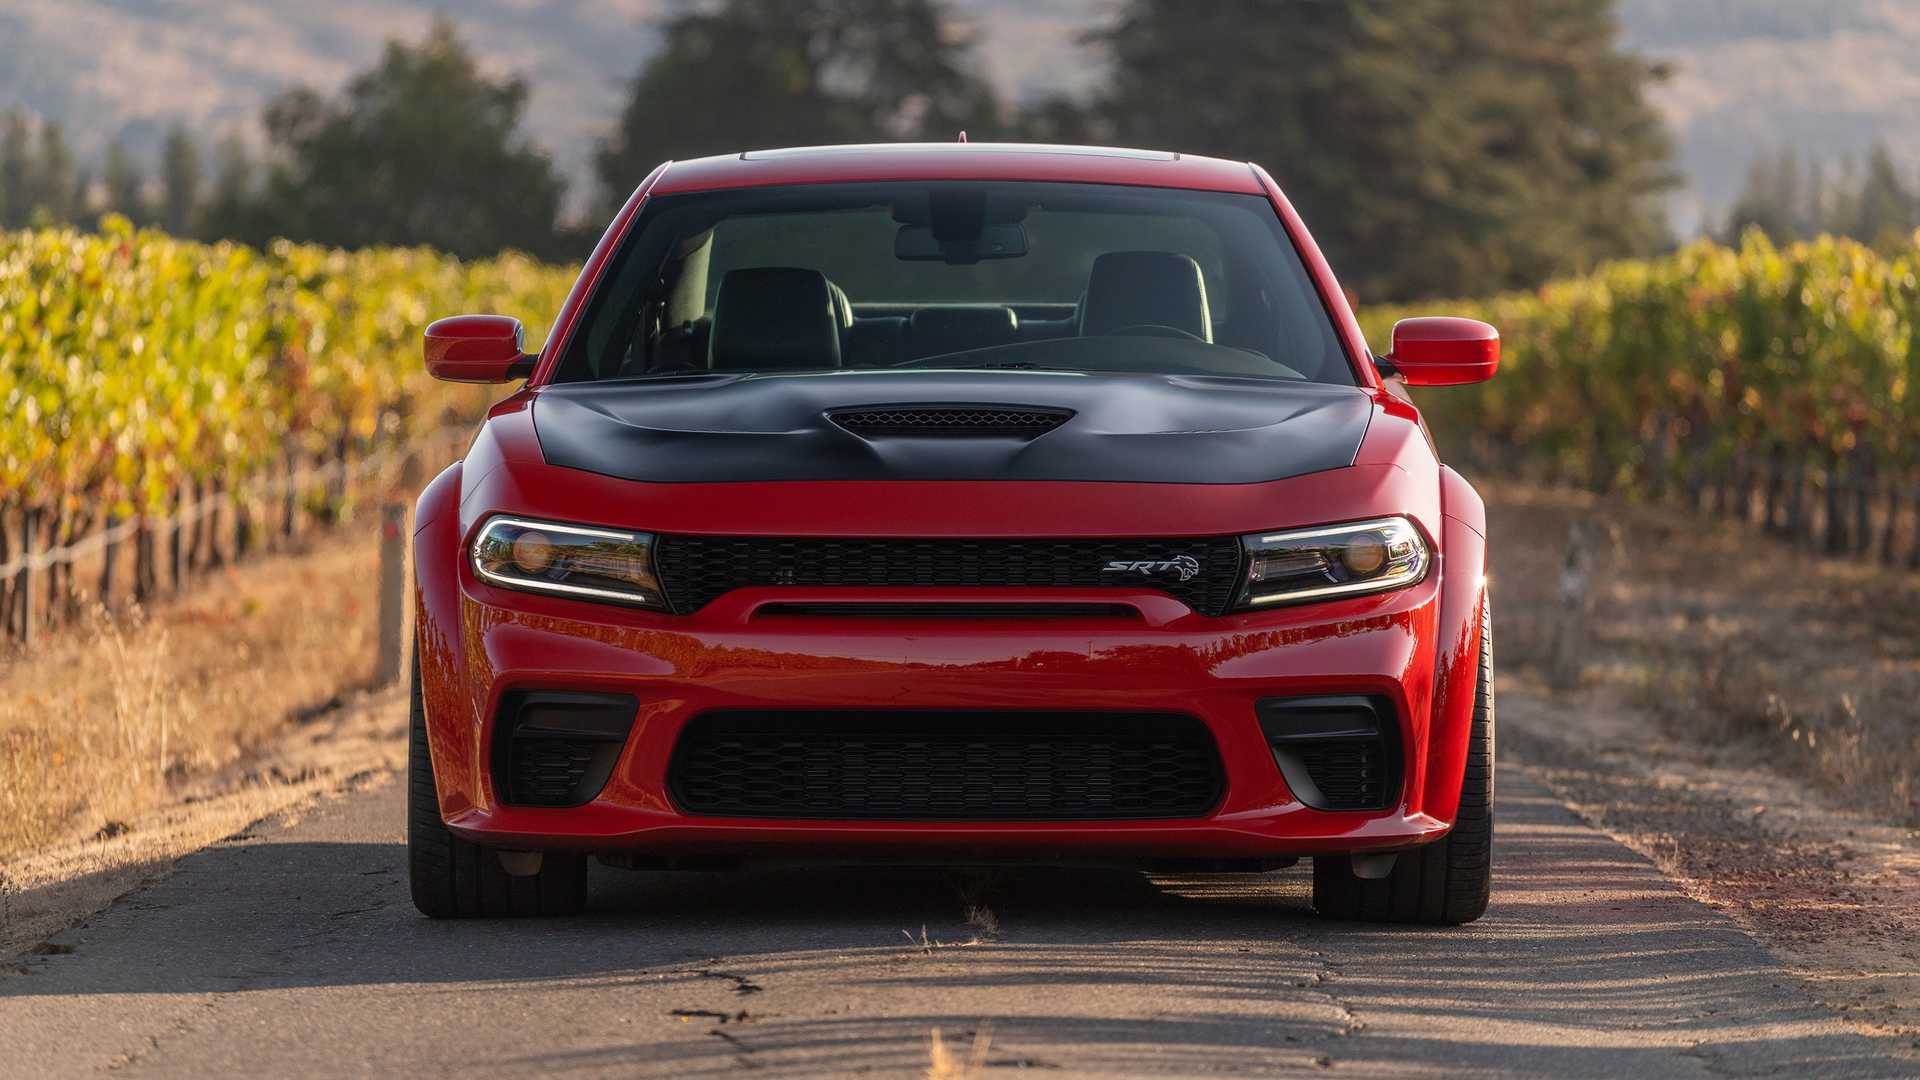 Dodge Charger SRT Hellcat Widebody: First Drive. Motor1.com Photo